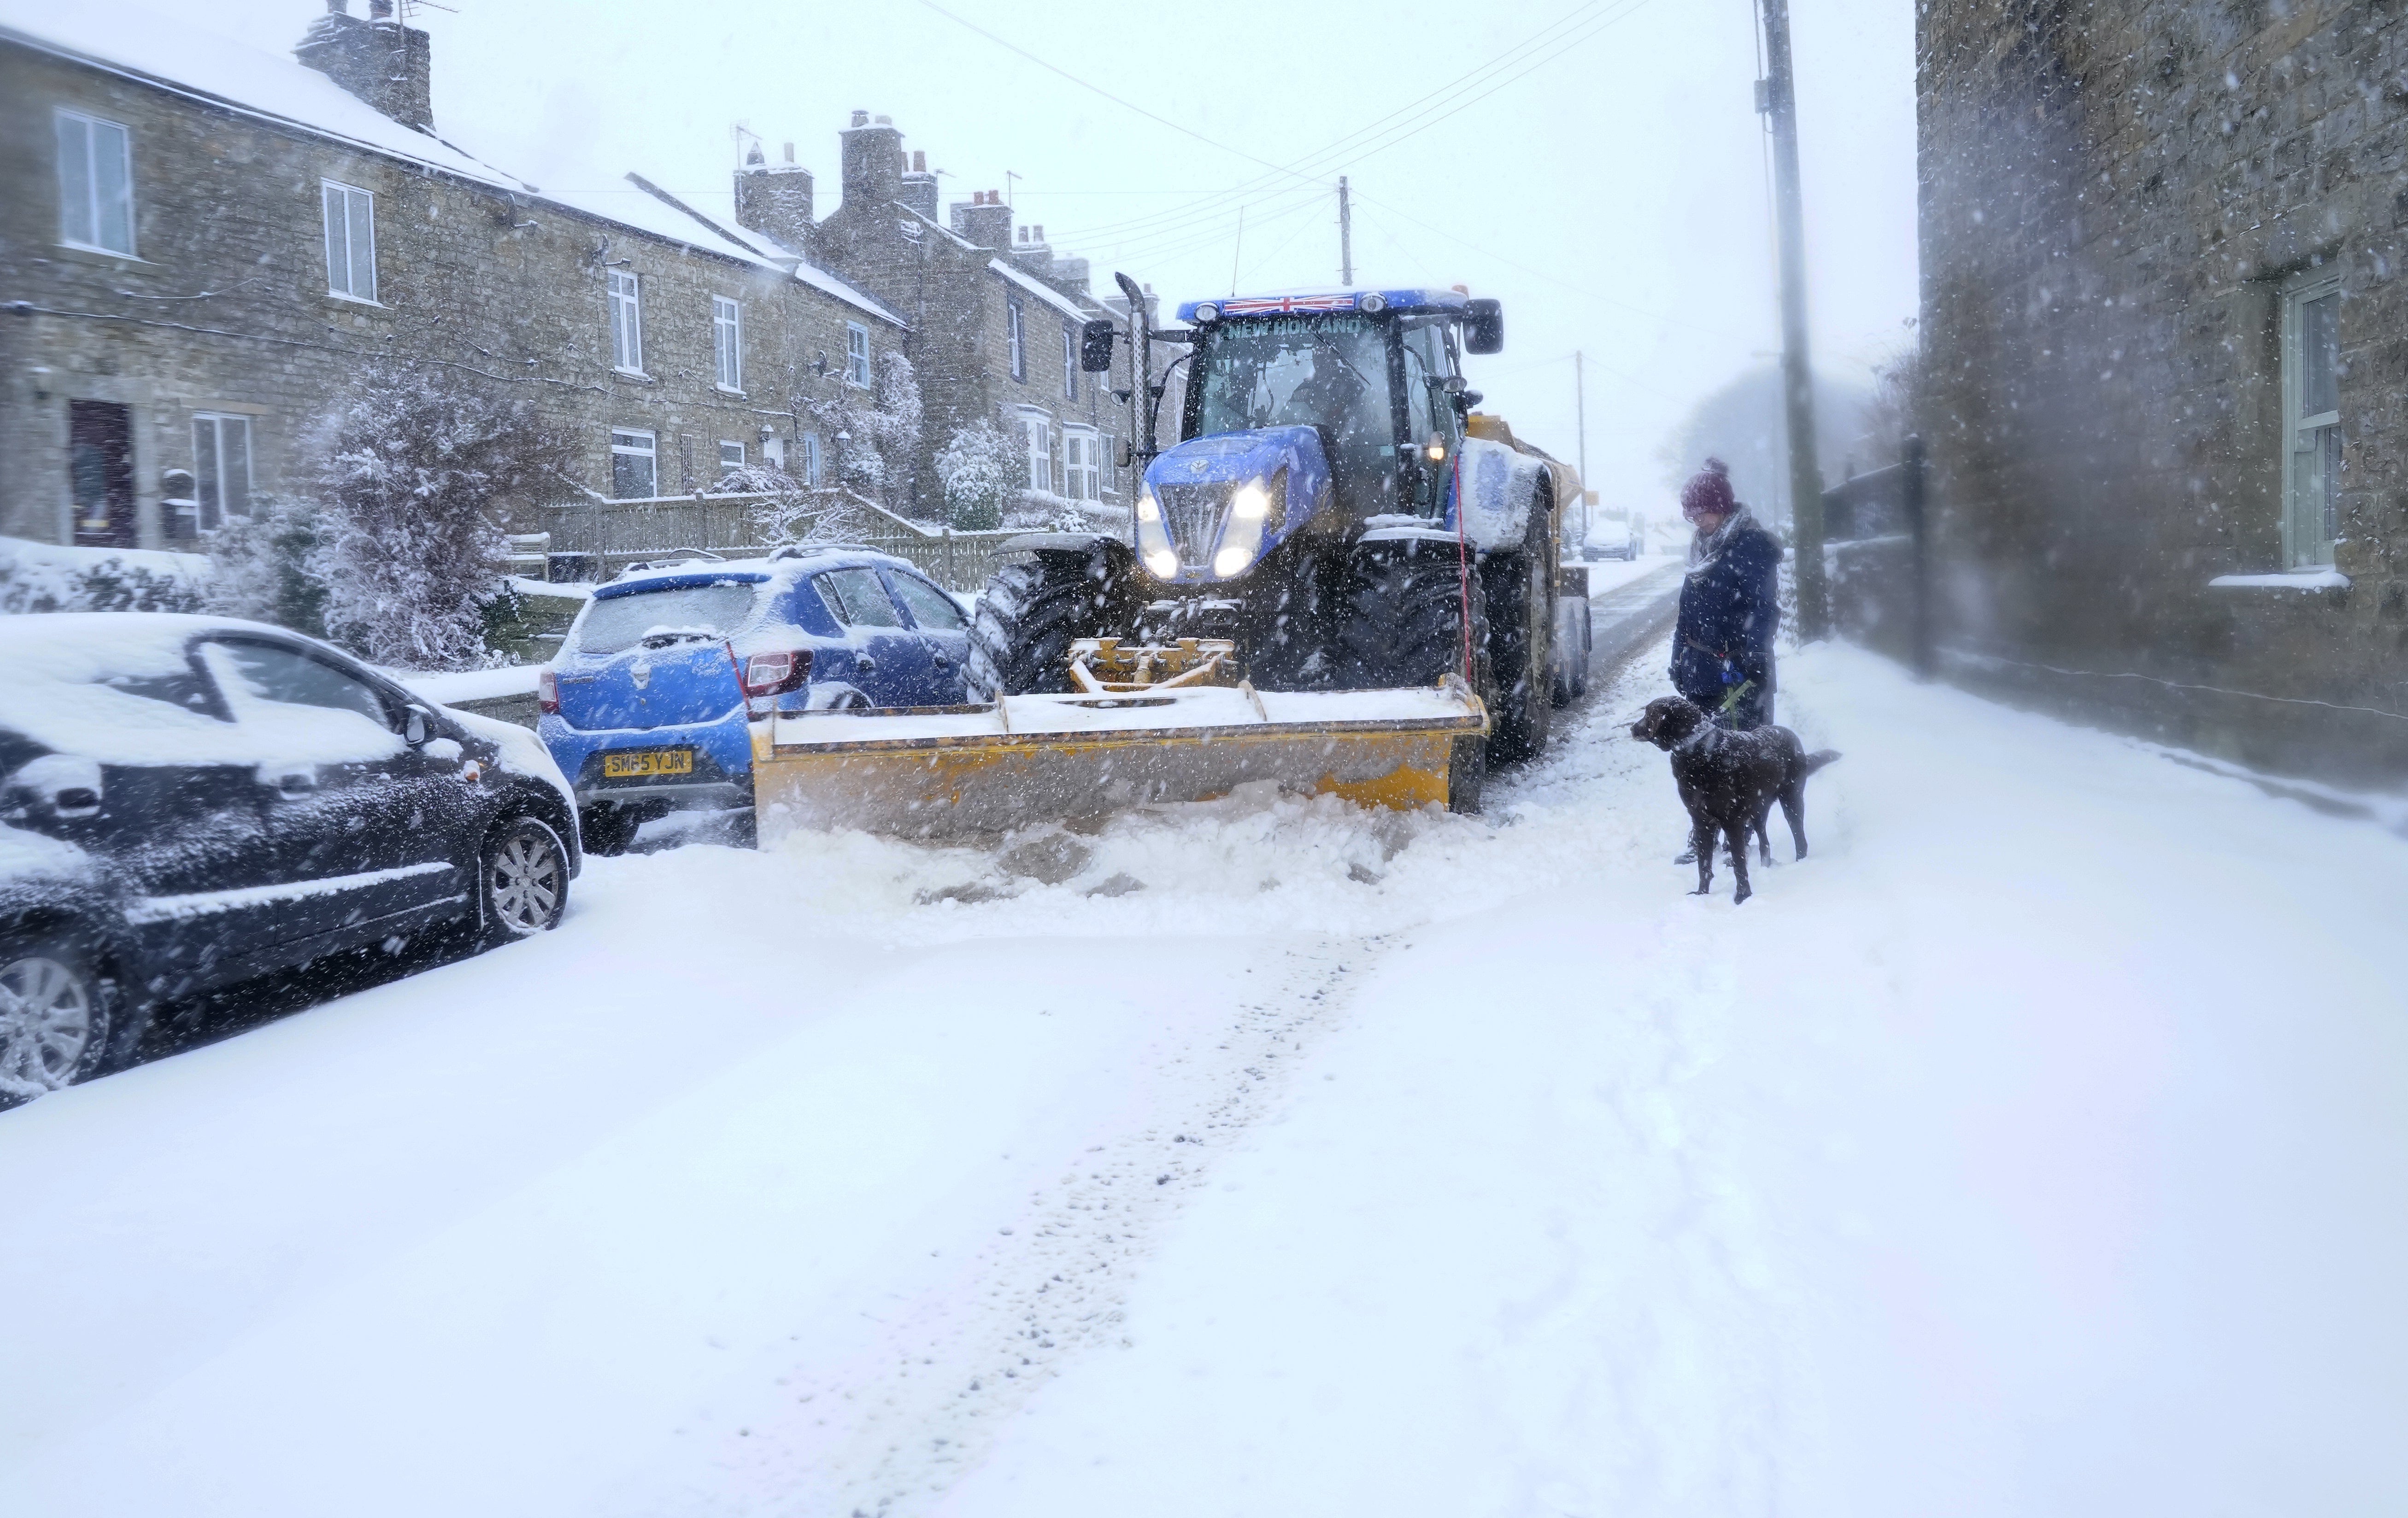 Kayachia Widdas and her dog Ozzy look at a snow plough in Bowes, County Durham, as heavy snow falls (Owen Humphreys/PA)